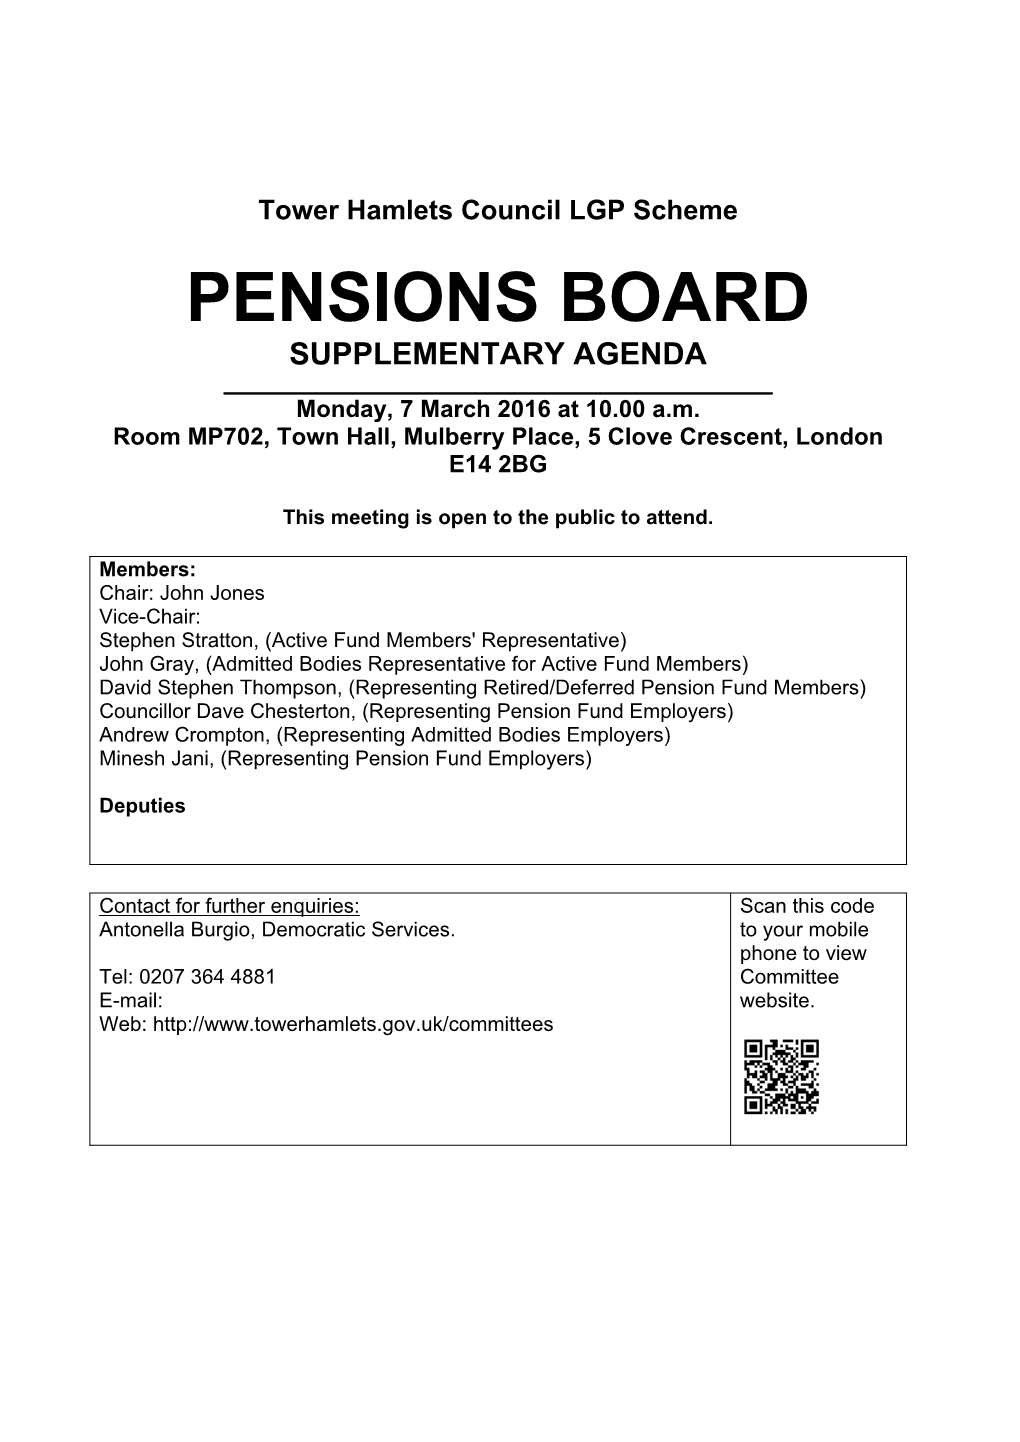 (Public Pack)Agenda Document for Pensions Board, 07/03/2016 10:00